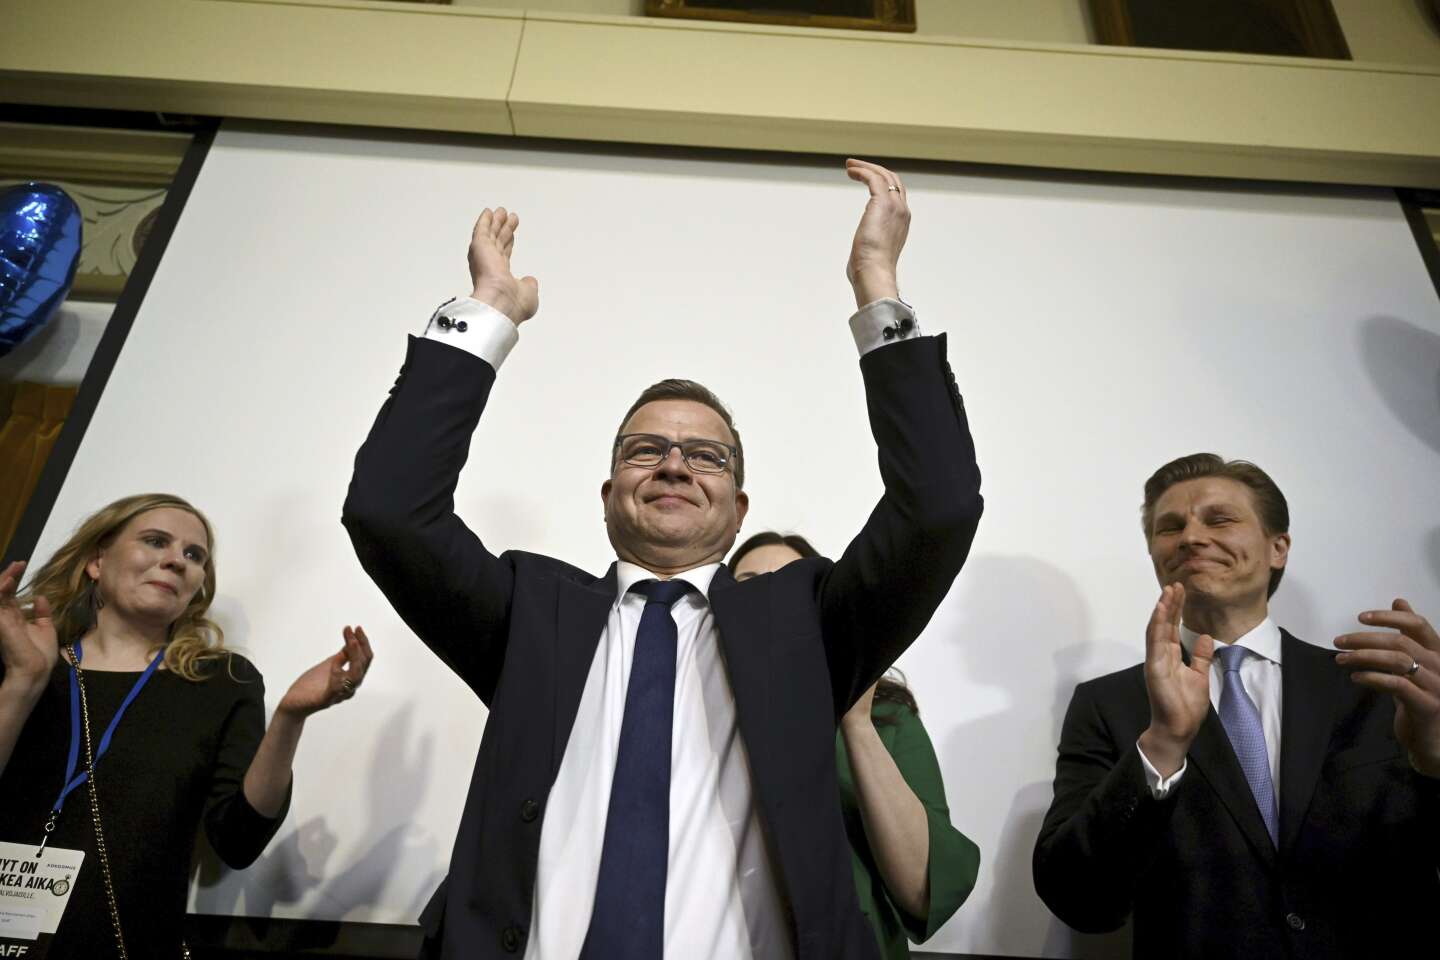 Finland's conservatives claim victory in general election